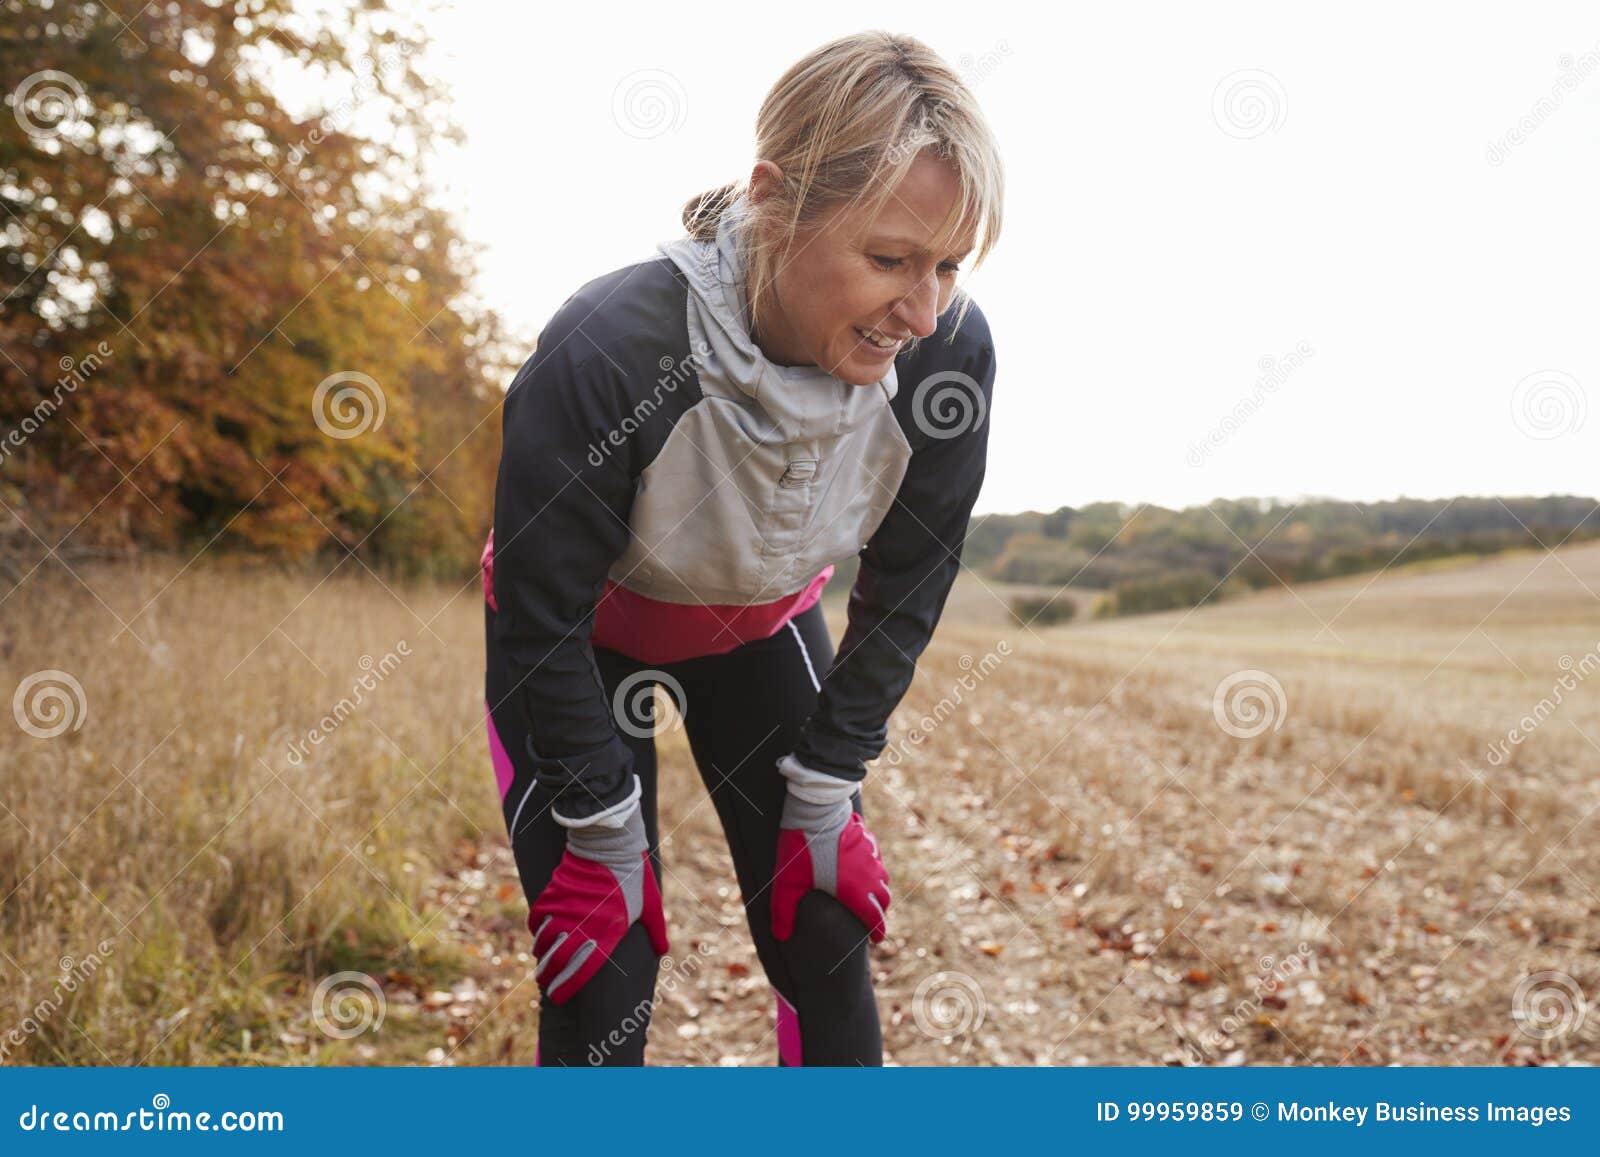 mature female runner pausing for breath during exercise in woods